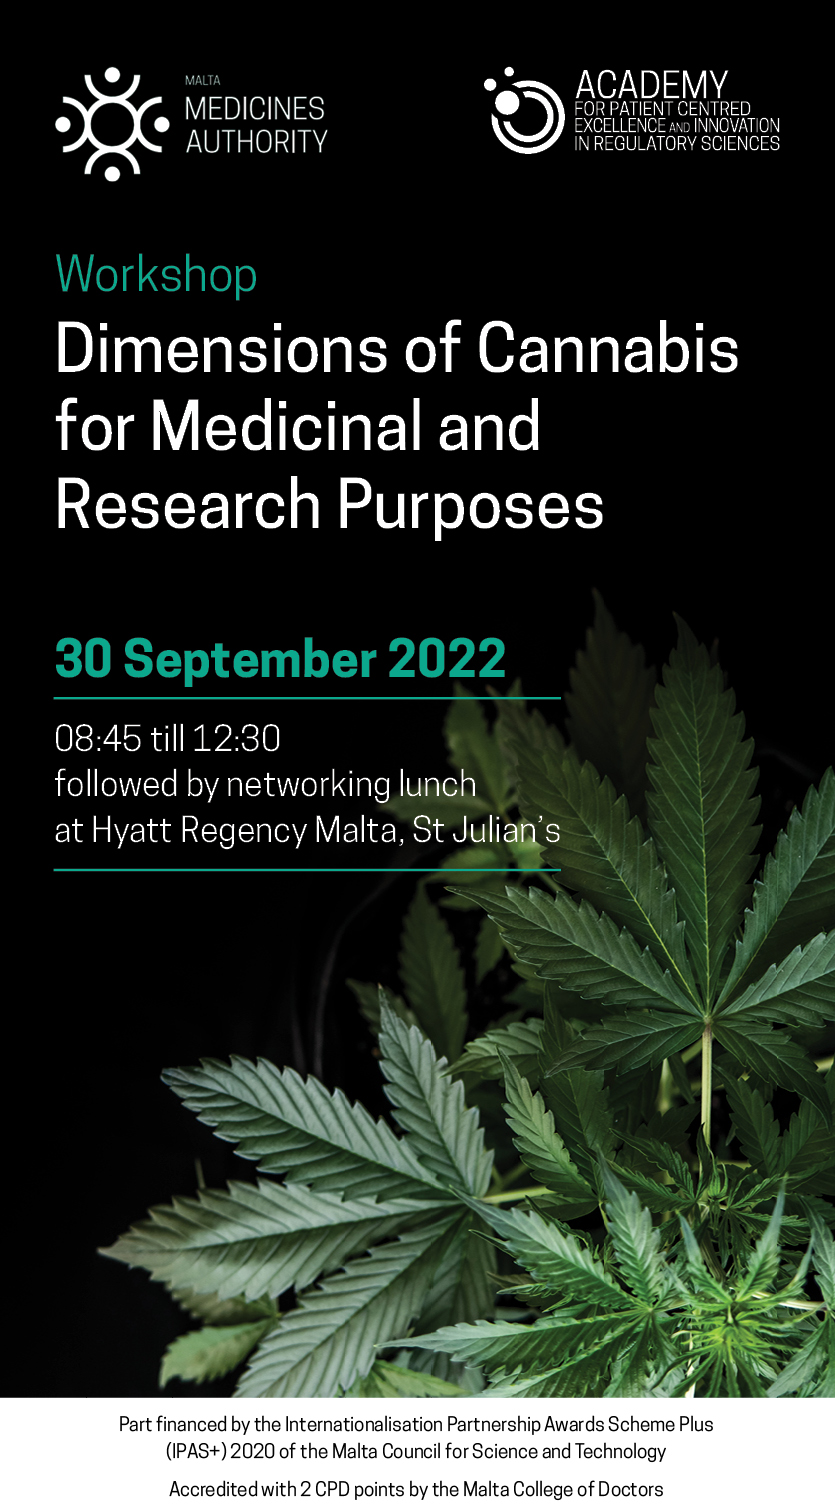 Dimensions of Cannabis for Medicinal and Research Purposes